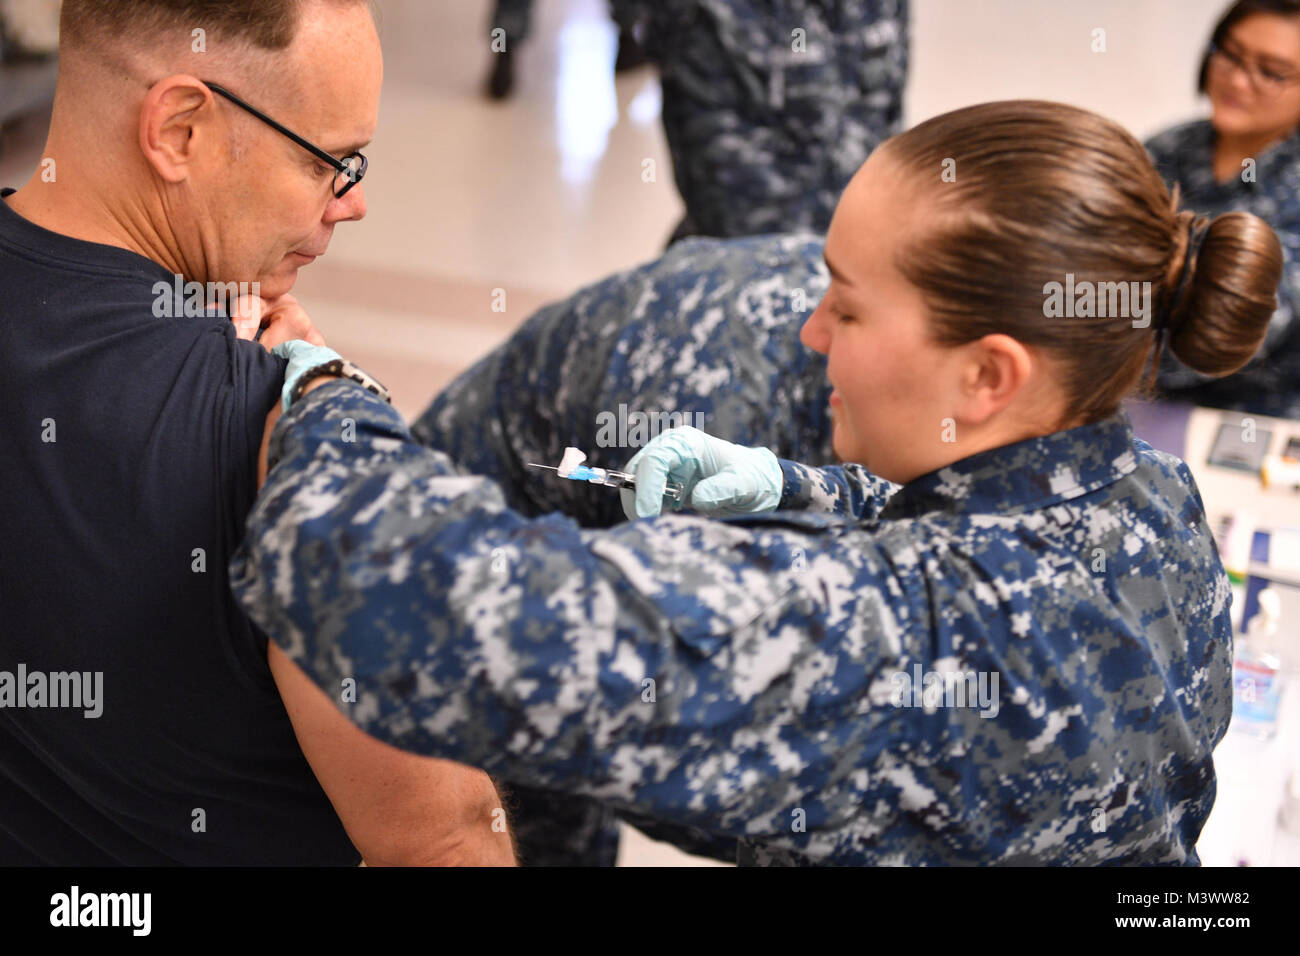 171101-N-JT254-030 SILVERDALE, Wash. (November 01, 2017) Hospital Corpsman 2nd Class Claire Anderson, assigned to Naval Hospital Bremerton, administers a flu vaccine to Lieutenant Commander Don Rogers, chaplain assigned to Naval Submarine Support Center Bangor.  The influenza, or “flu”, has the potential to adversely impact Navy force readiness and mission execution, and vaccination is mandatory for DoD uniformed personnel. (U.S. Navy photo by Mass Communication Specialist Seaman Christopher Jahnke) 171101-N-JT254-030 by Naval Base Kitsap (NBK) Stock Photo